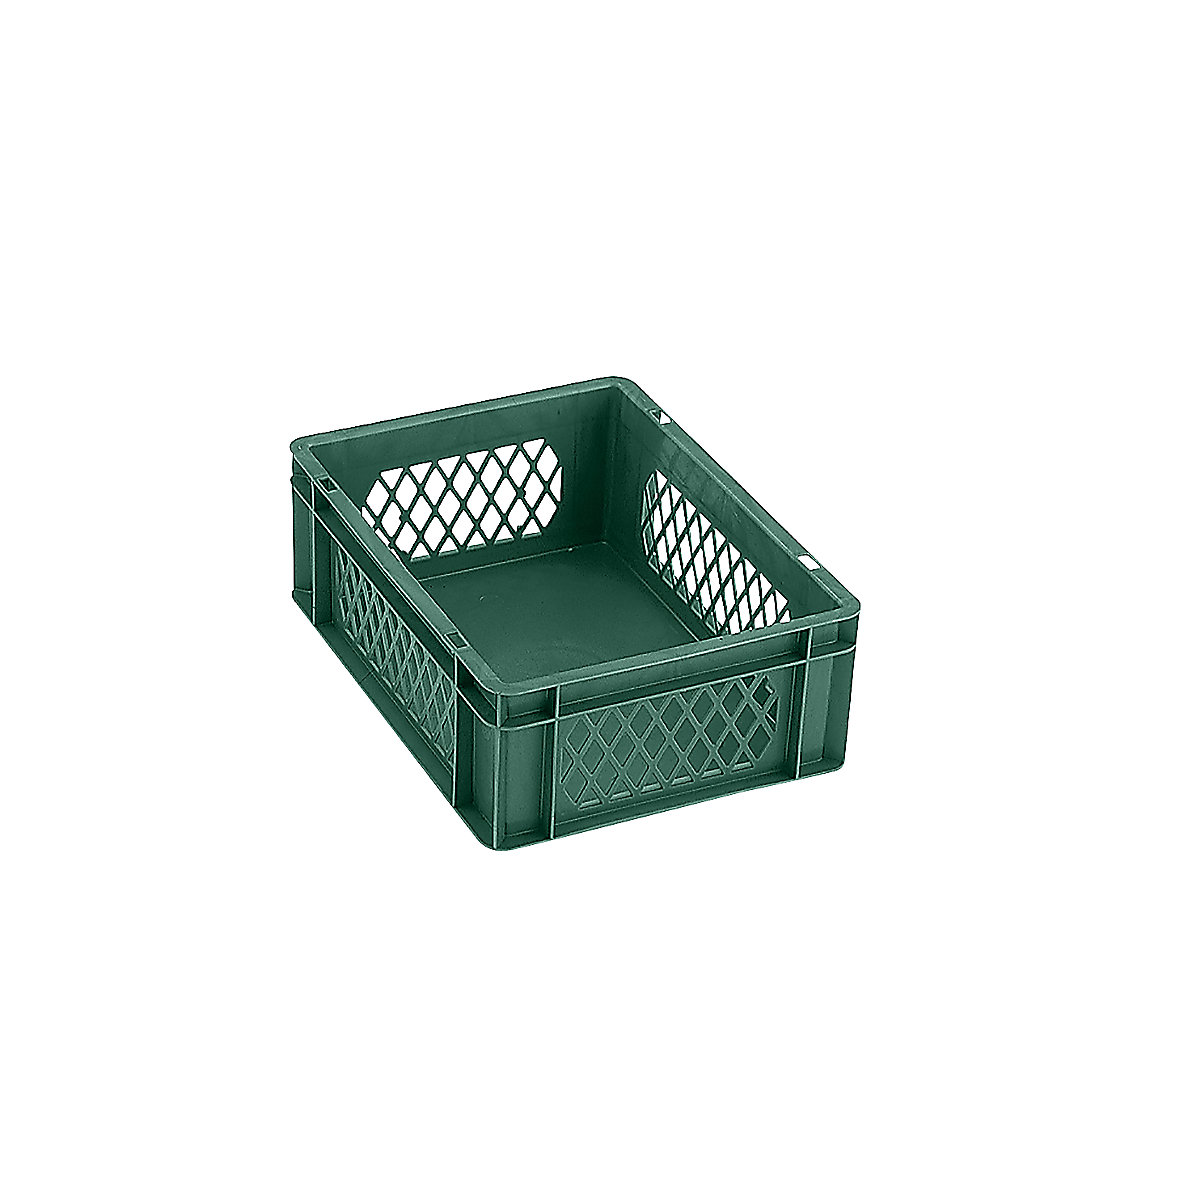 Euro stacking container, perforated walls, closed base, LxWxH 400 x 300 x 145 mm, green, pack of 5